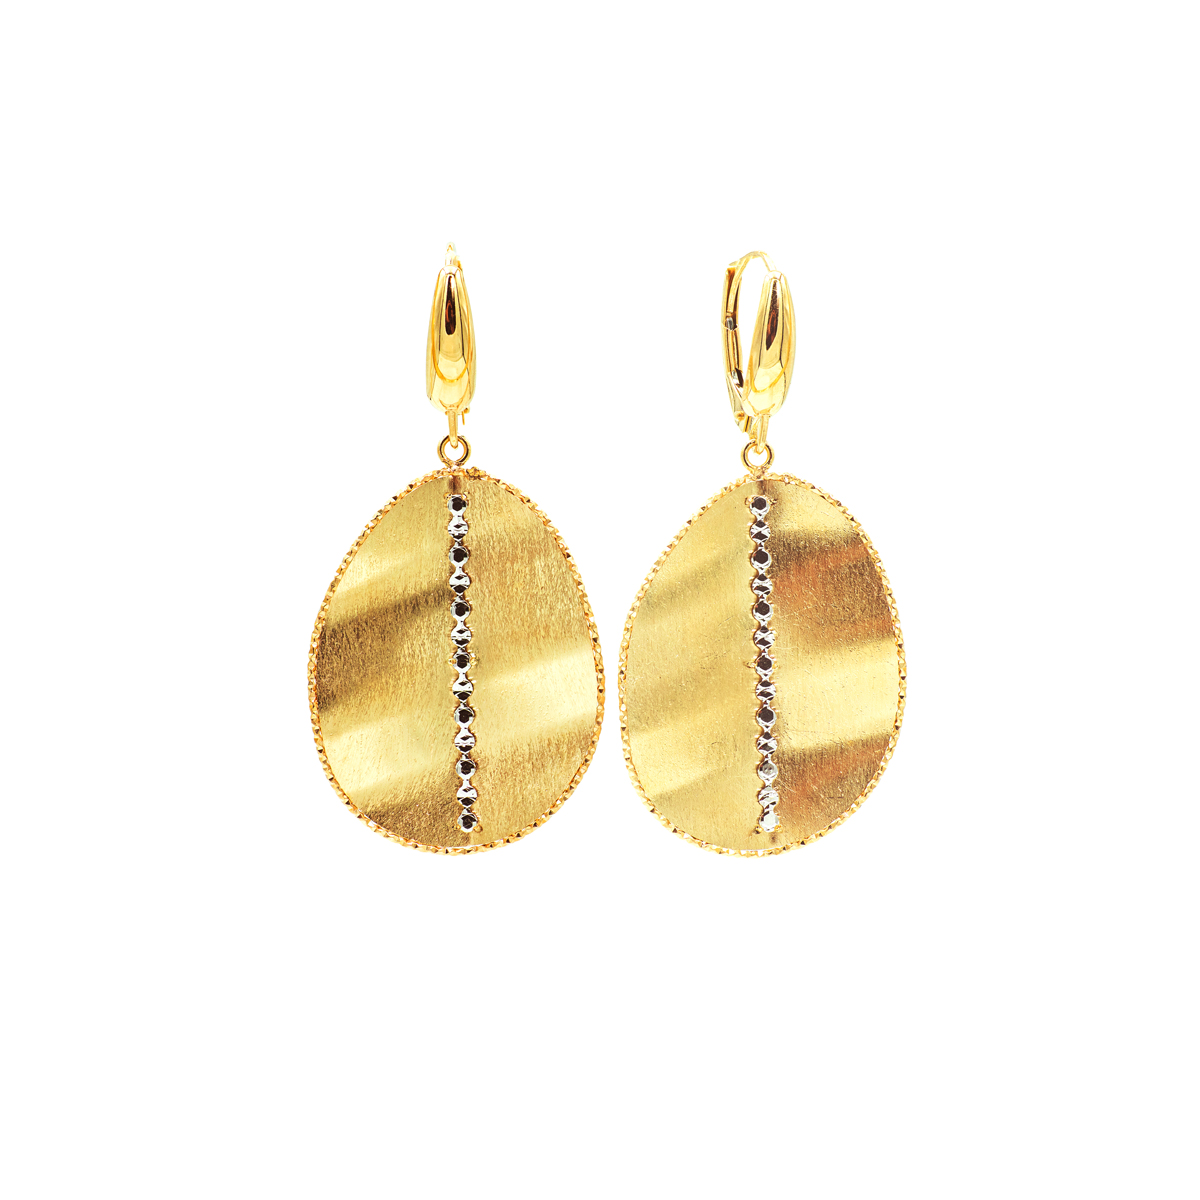 Leaf Disc Dangle Earrings in 14k Yellow and White Gold